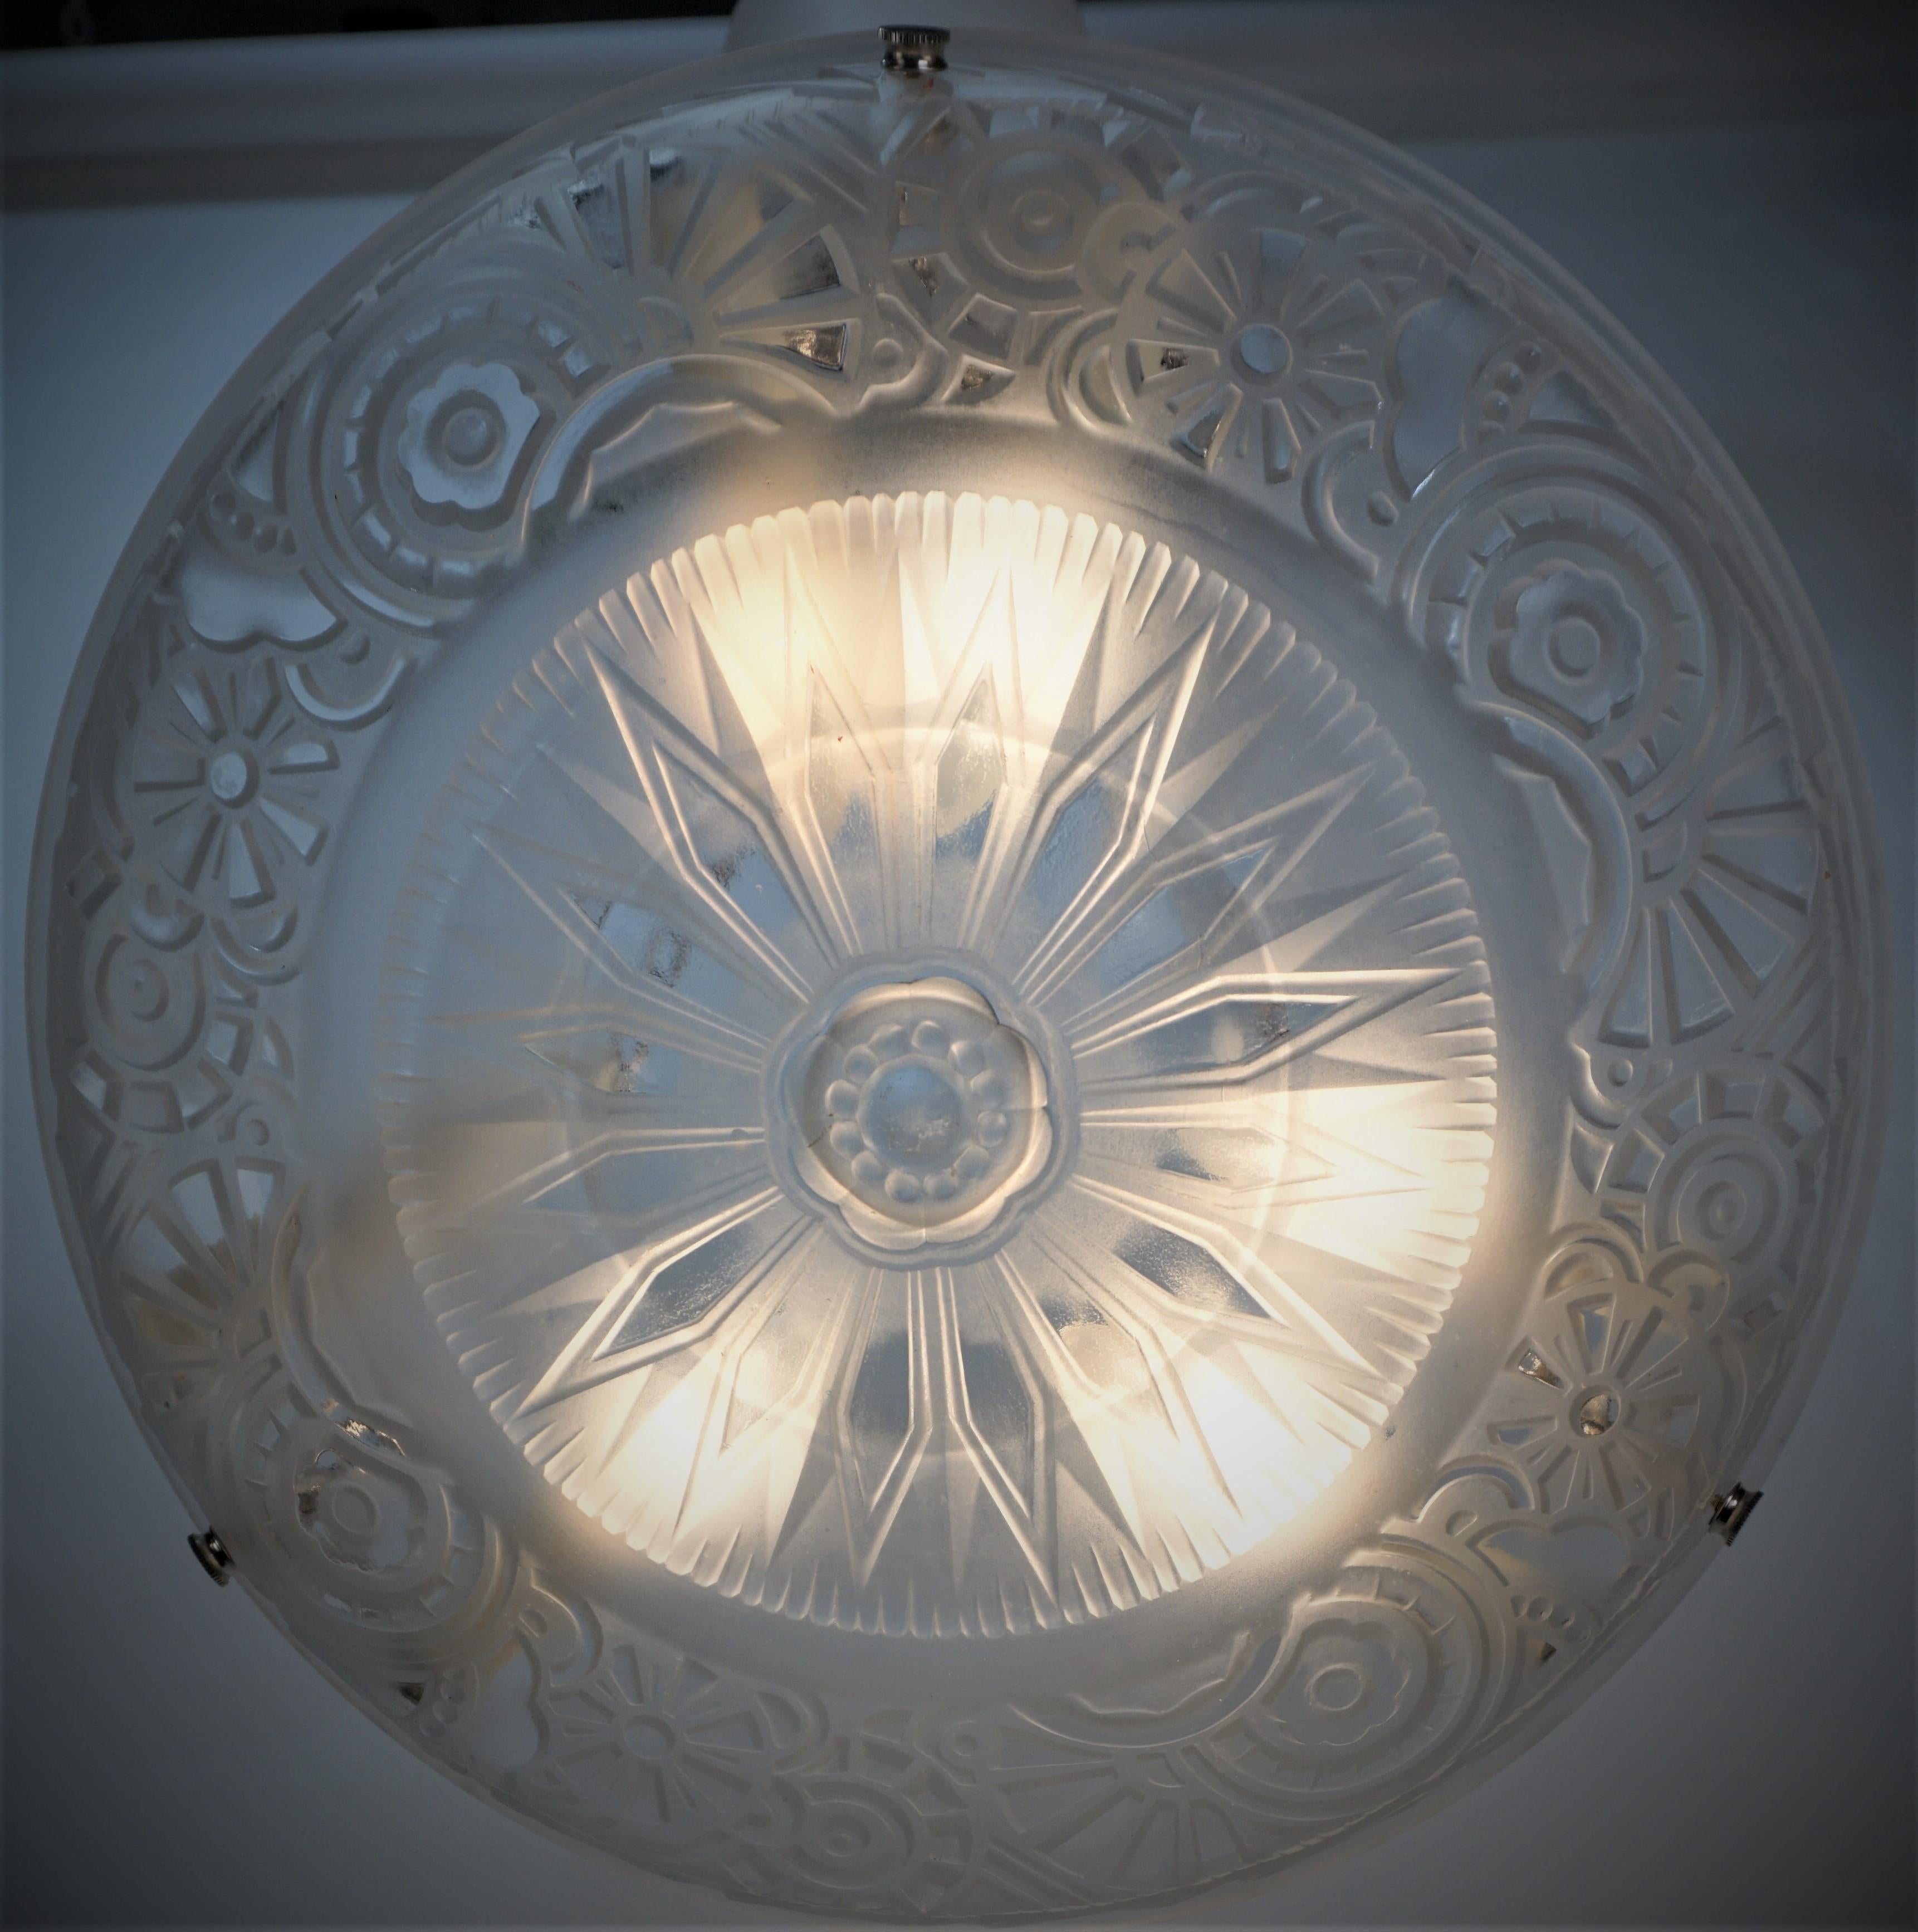 Beautiful clear frost geometric design with clear high light art deco chandeliers with nickel on bronze hardware.
Professionally rewired with six lights (60 watts max each) and ready for installation.